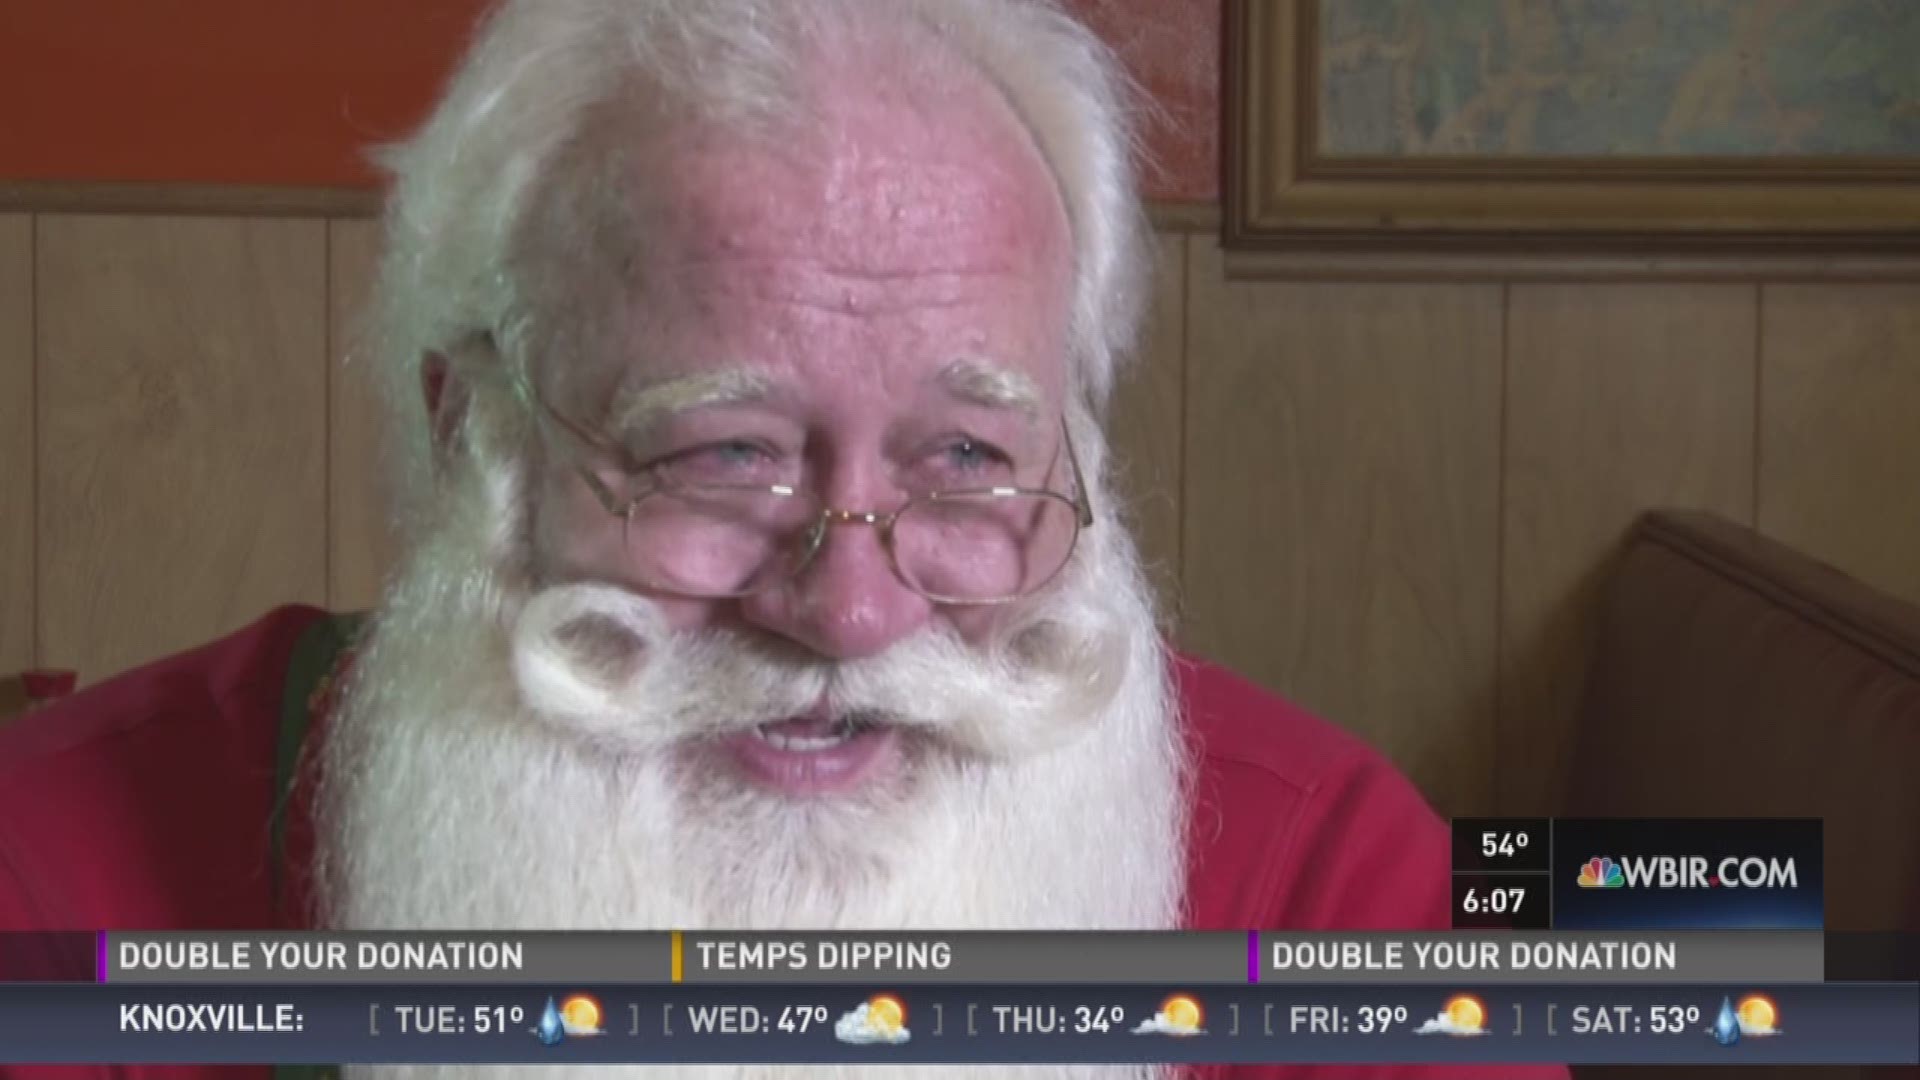 Dec. 12, 2016: Santa grants a dying East Tennessee boy's final wish for Christmas.